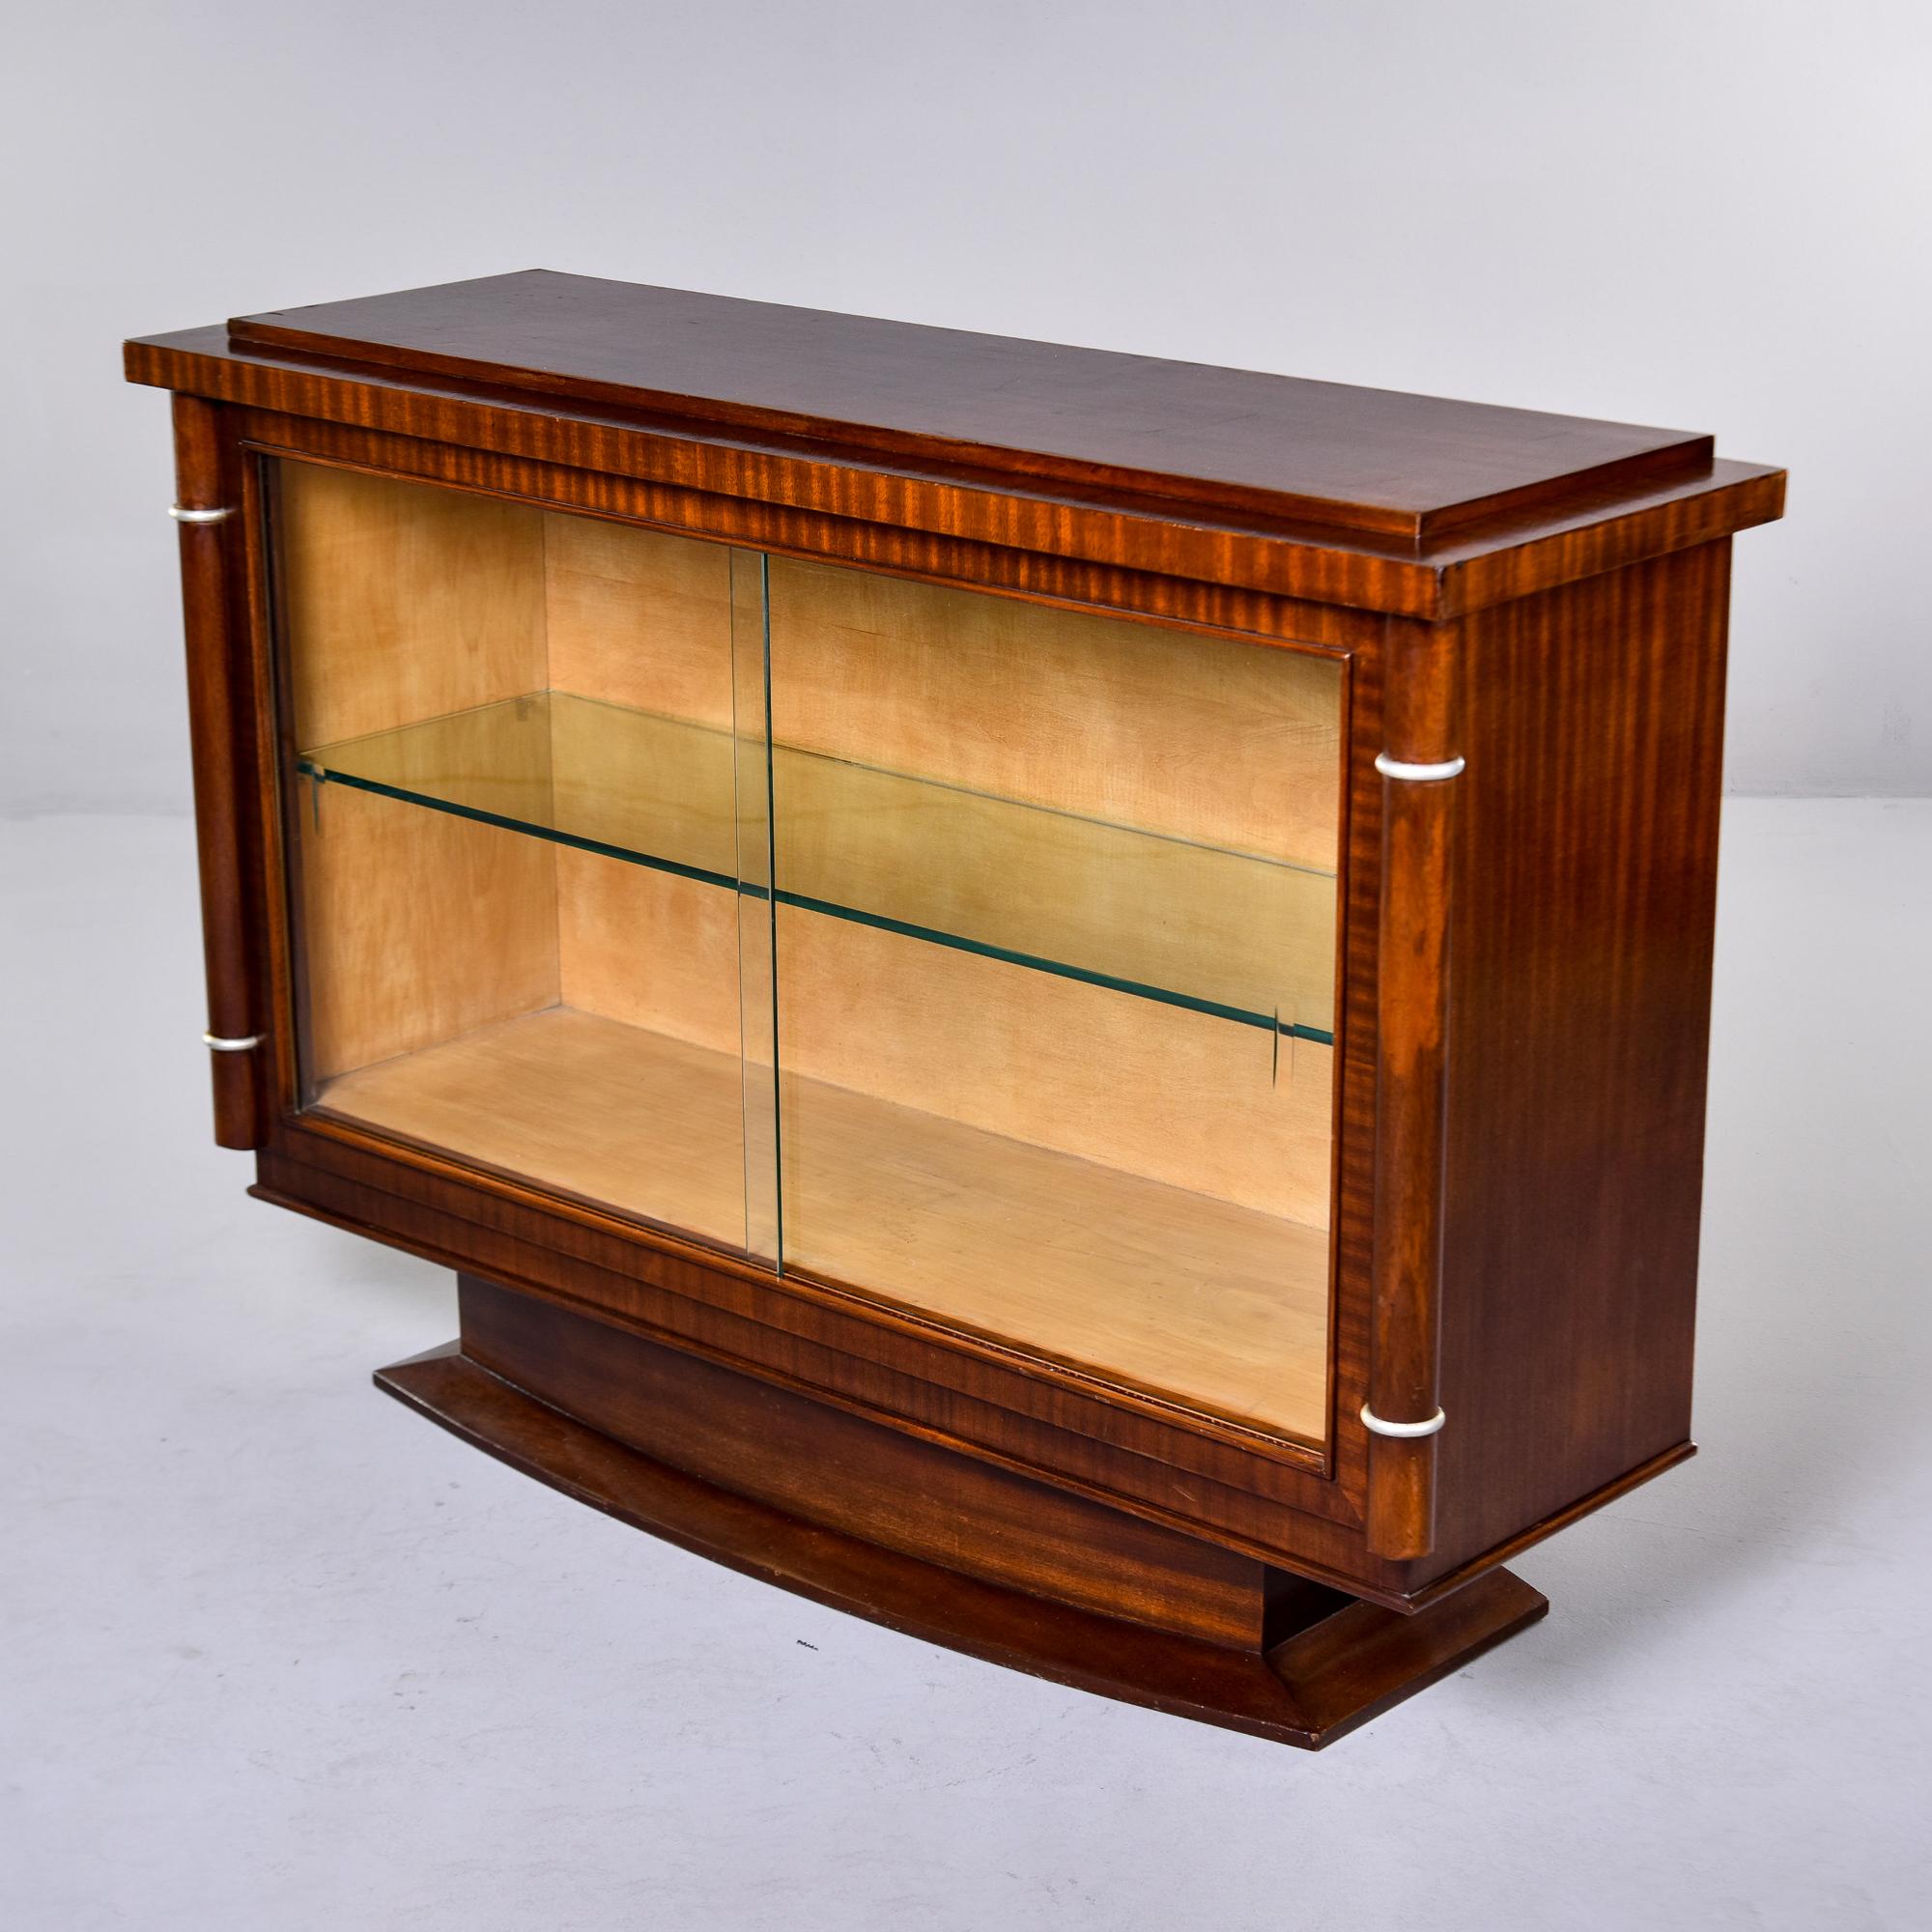 Found in France, this Art Deco cabinet dates from the 1930s. This piece features a wide ovoid pedestal base, sliding glass doors, a single interior fixed glass shelf, decorative columns on the sides and cross banded veneer edge framing the glass